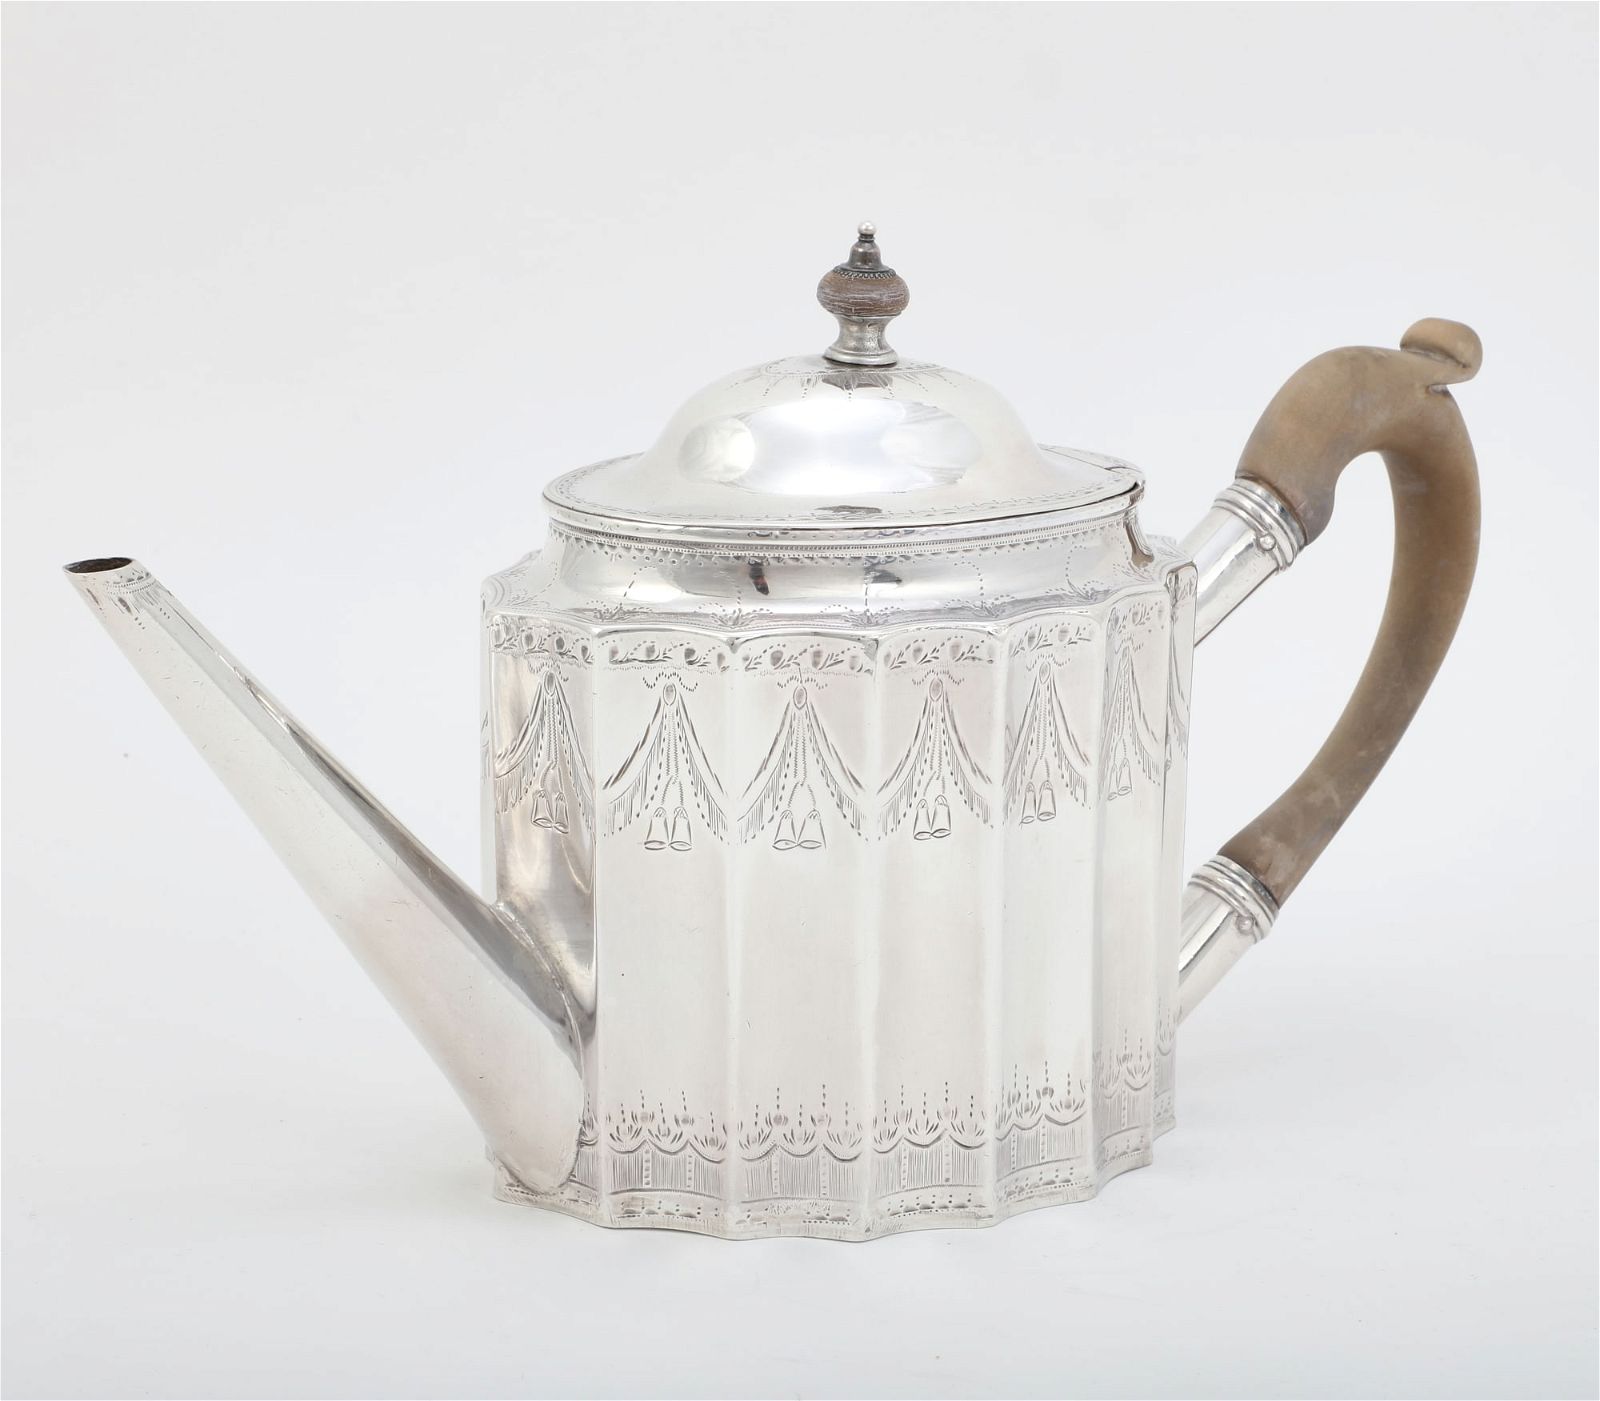 A GEORGE III STERLING SILVER TEAPOT,